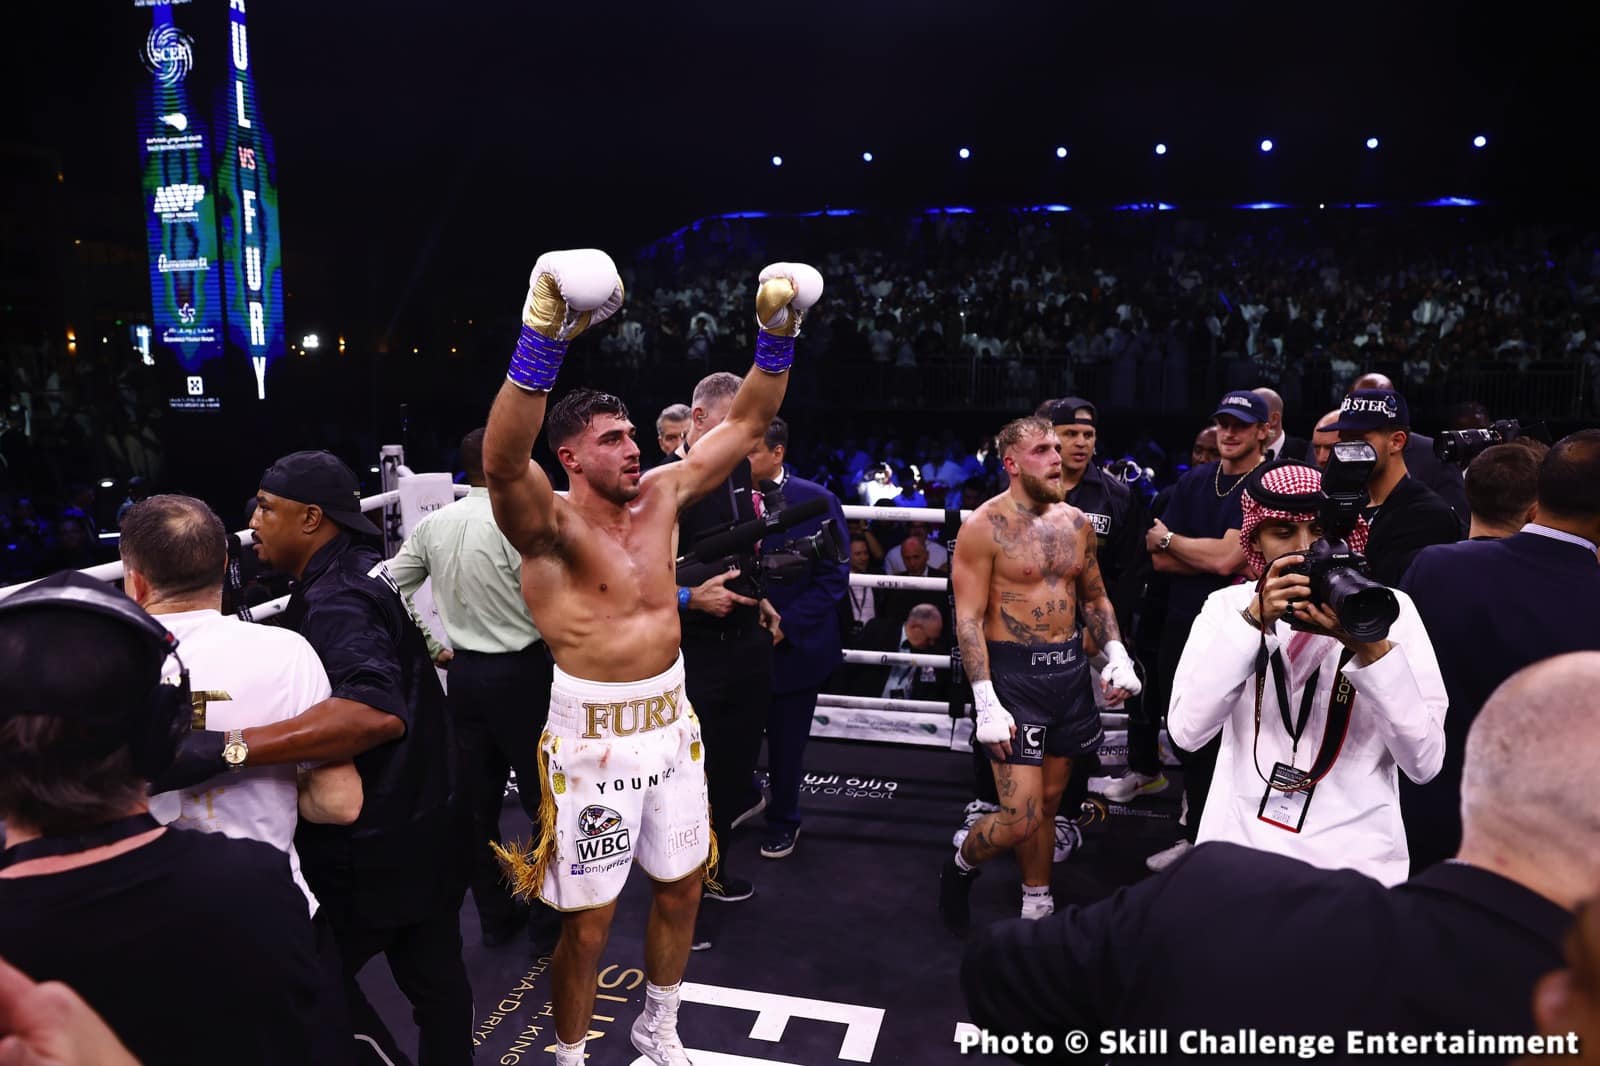 Image: Deontay Wilder says Jake Paul should have won, referee cost him the victory over Tommy Fury